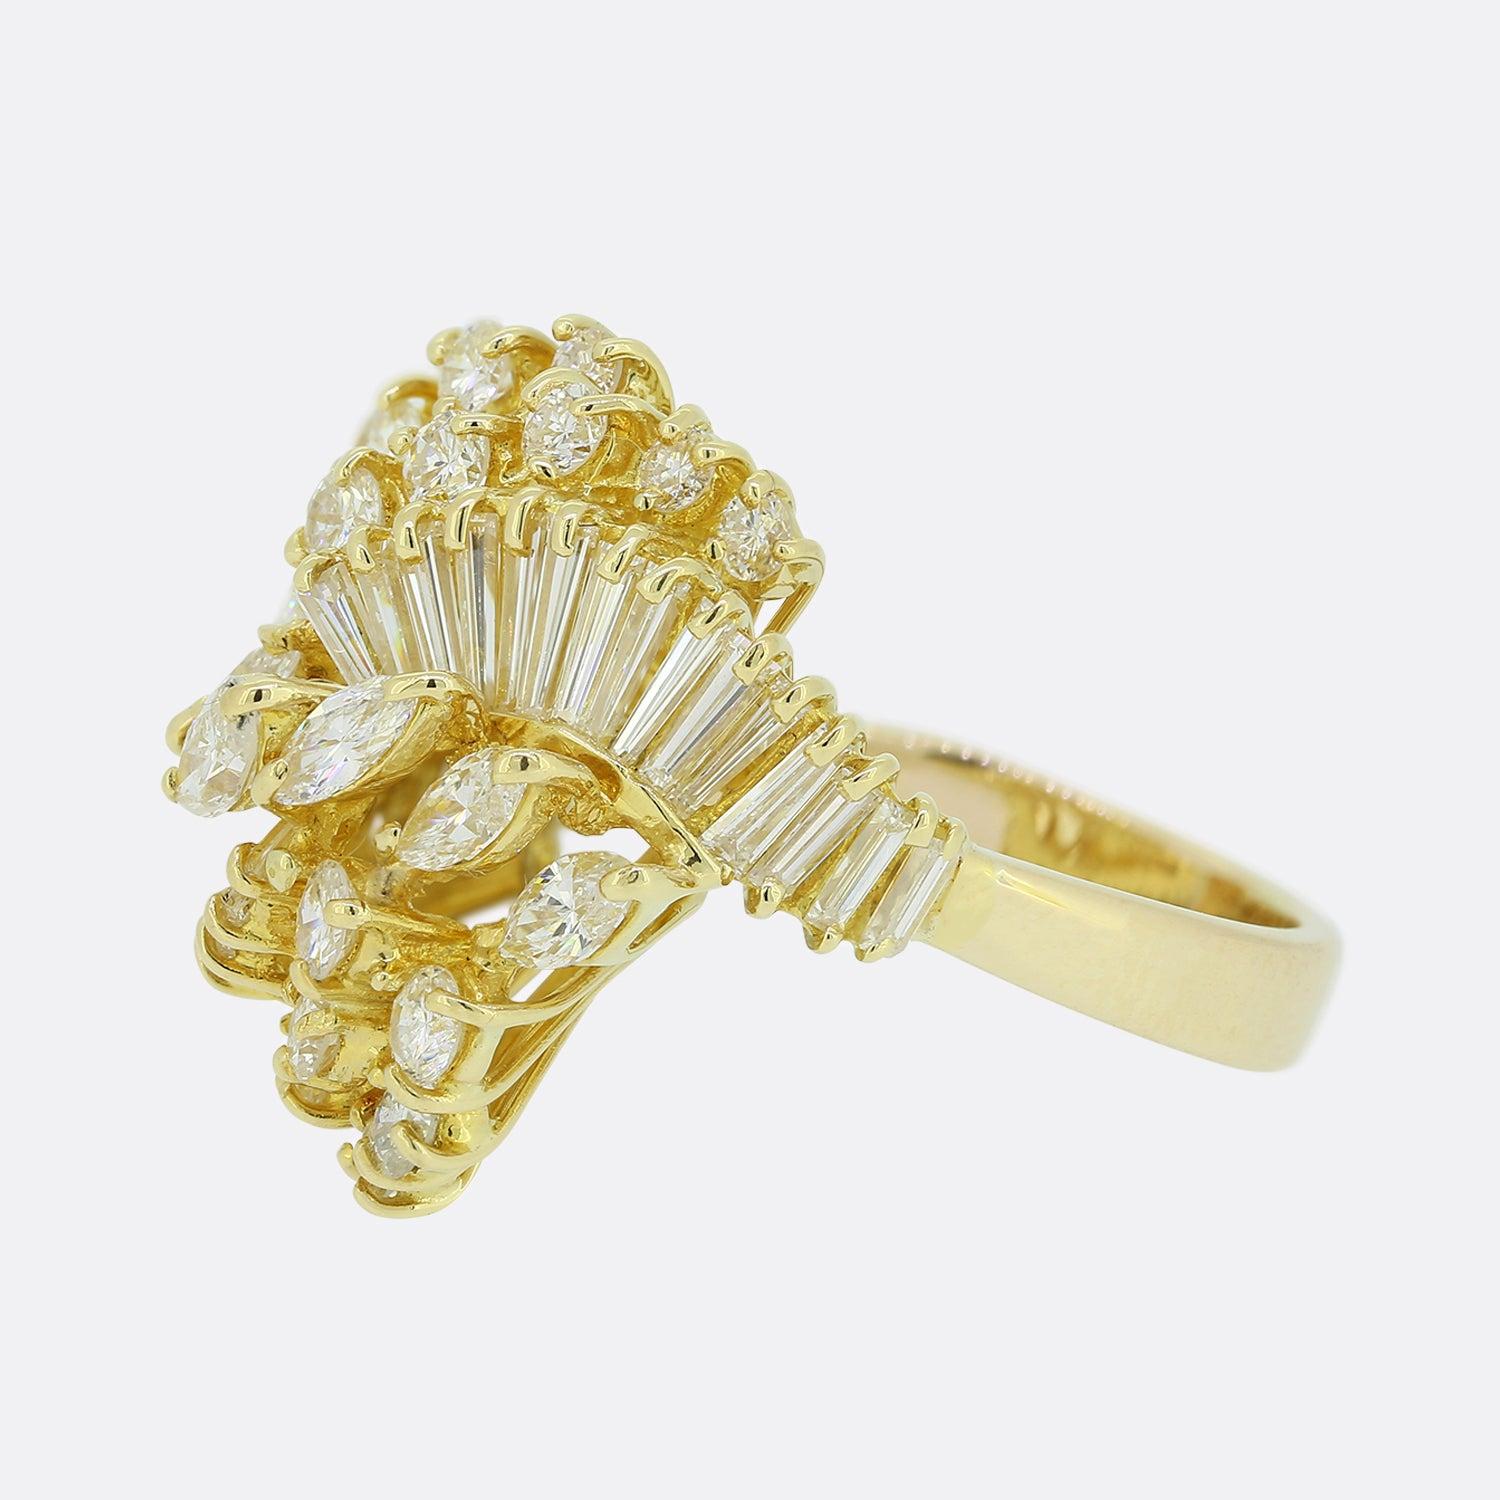 Here we have a gloriously wild vintage diamond dress ring. This piece is formed through five separate clusters of round brilliant, marquise and baguette cut diamonds which sit proud in an undulating fashion. All stones here are wonderfully matched